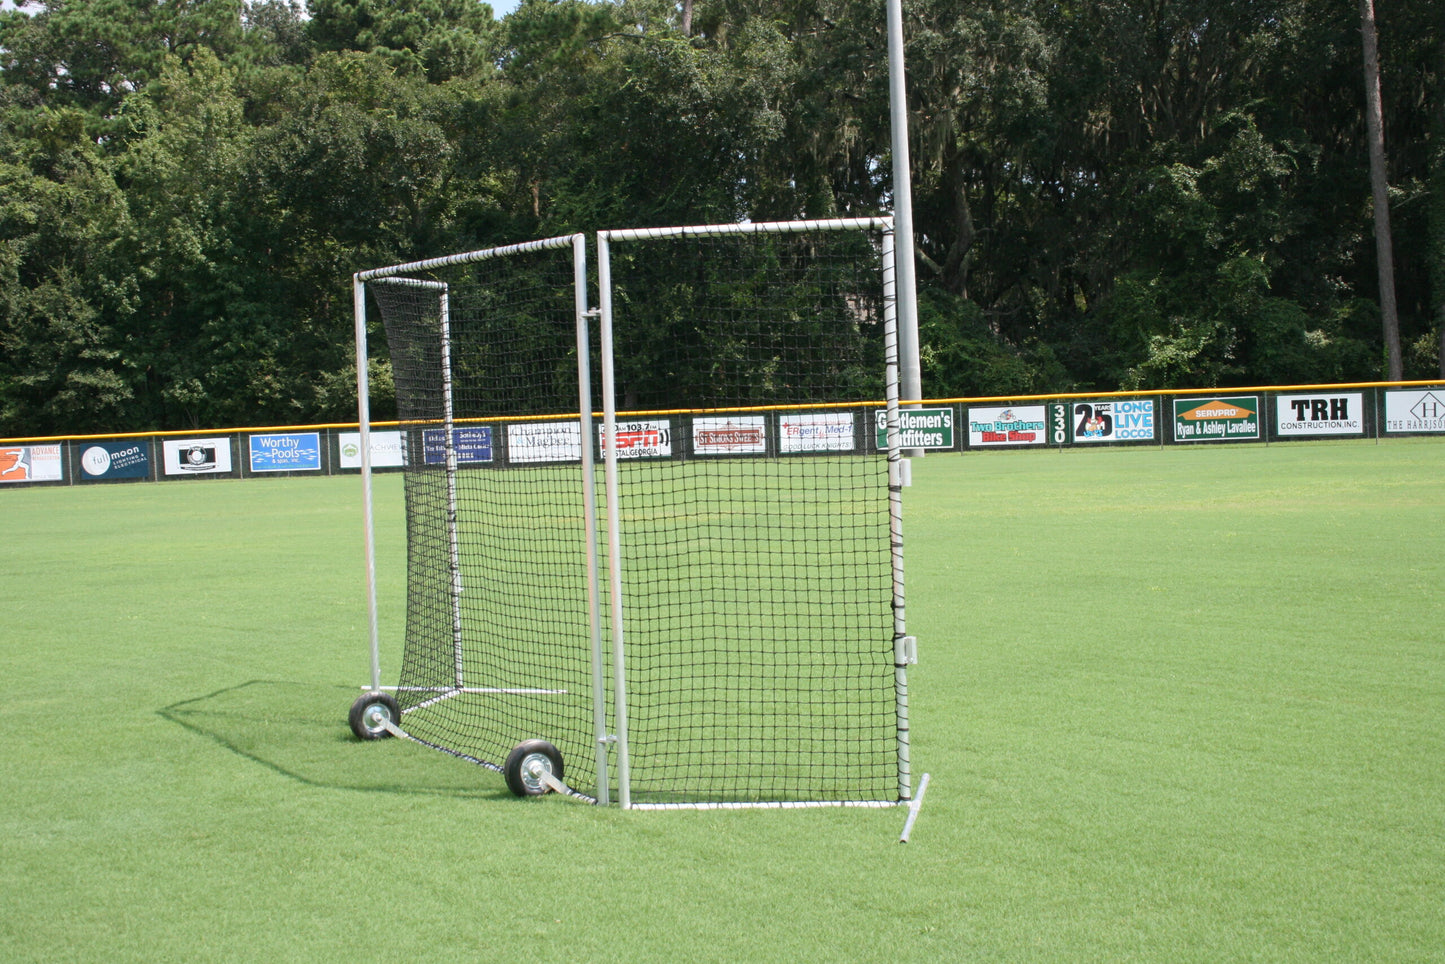 A soccer goal on the field with a net.